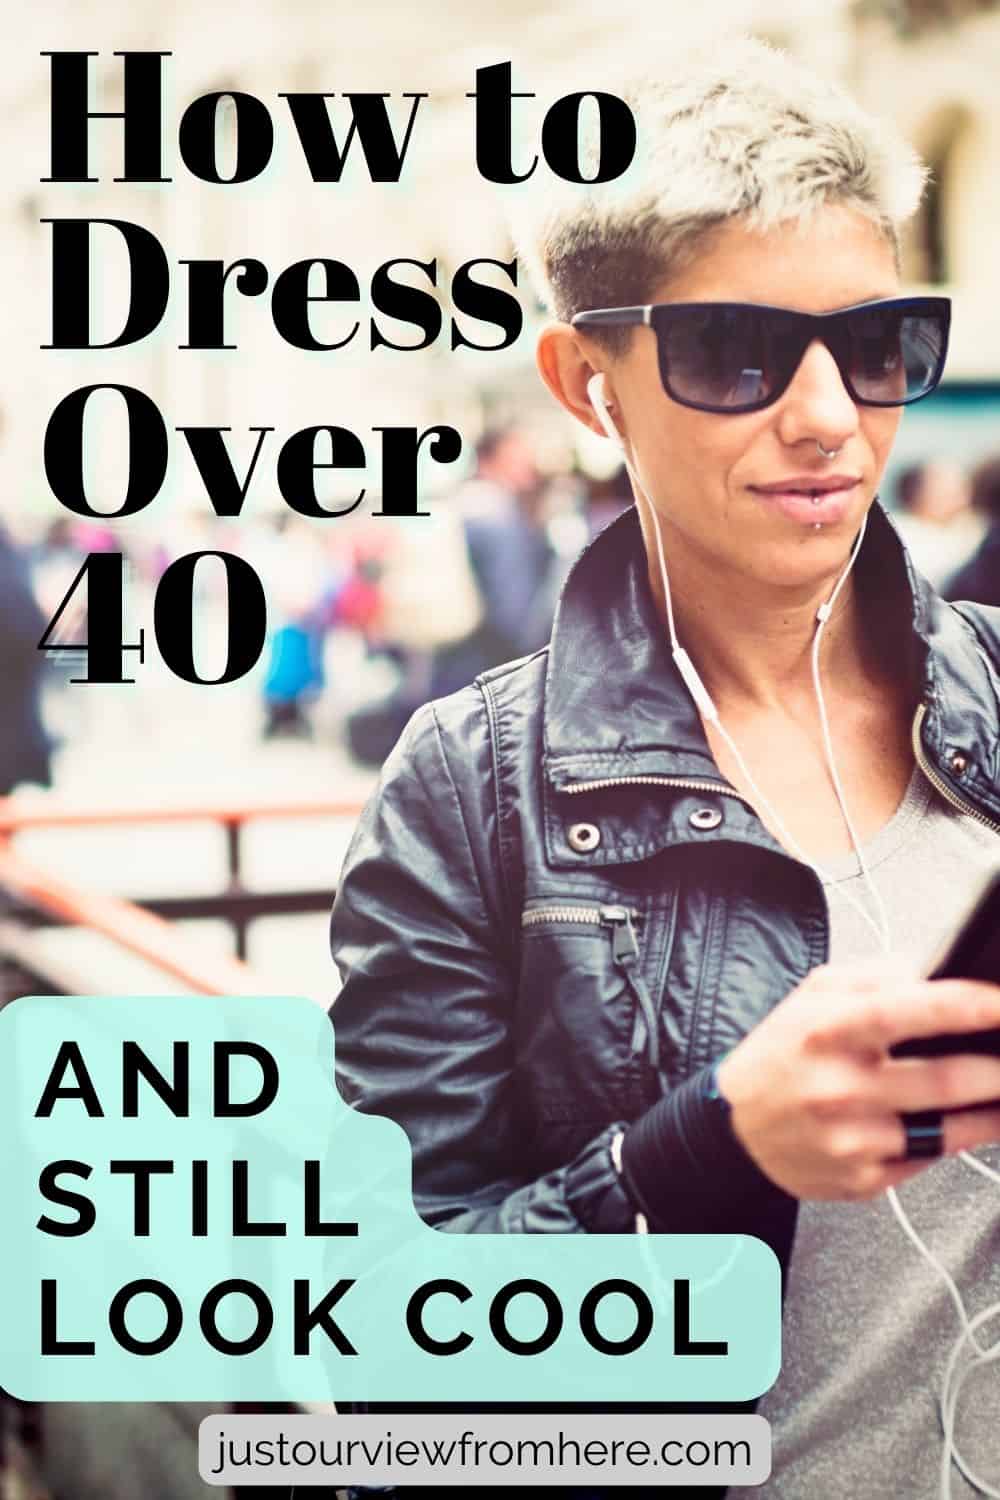 over 40 street fashion model wearing black leather jacket, text overlay how to dress over 40 and still look cool